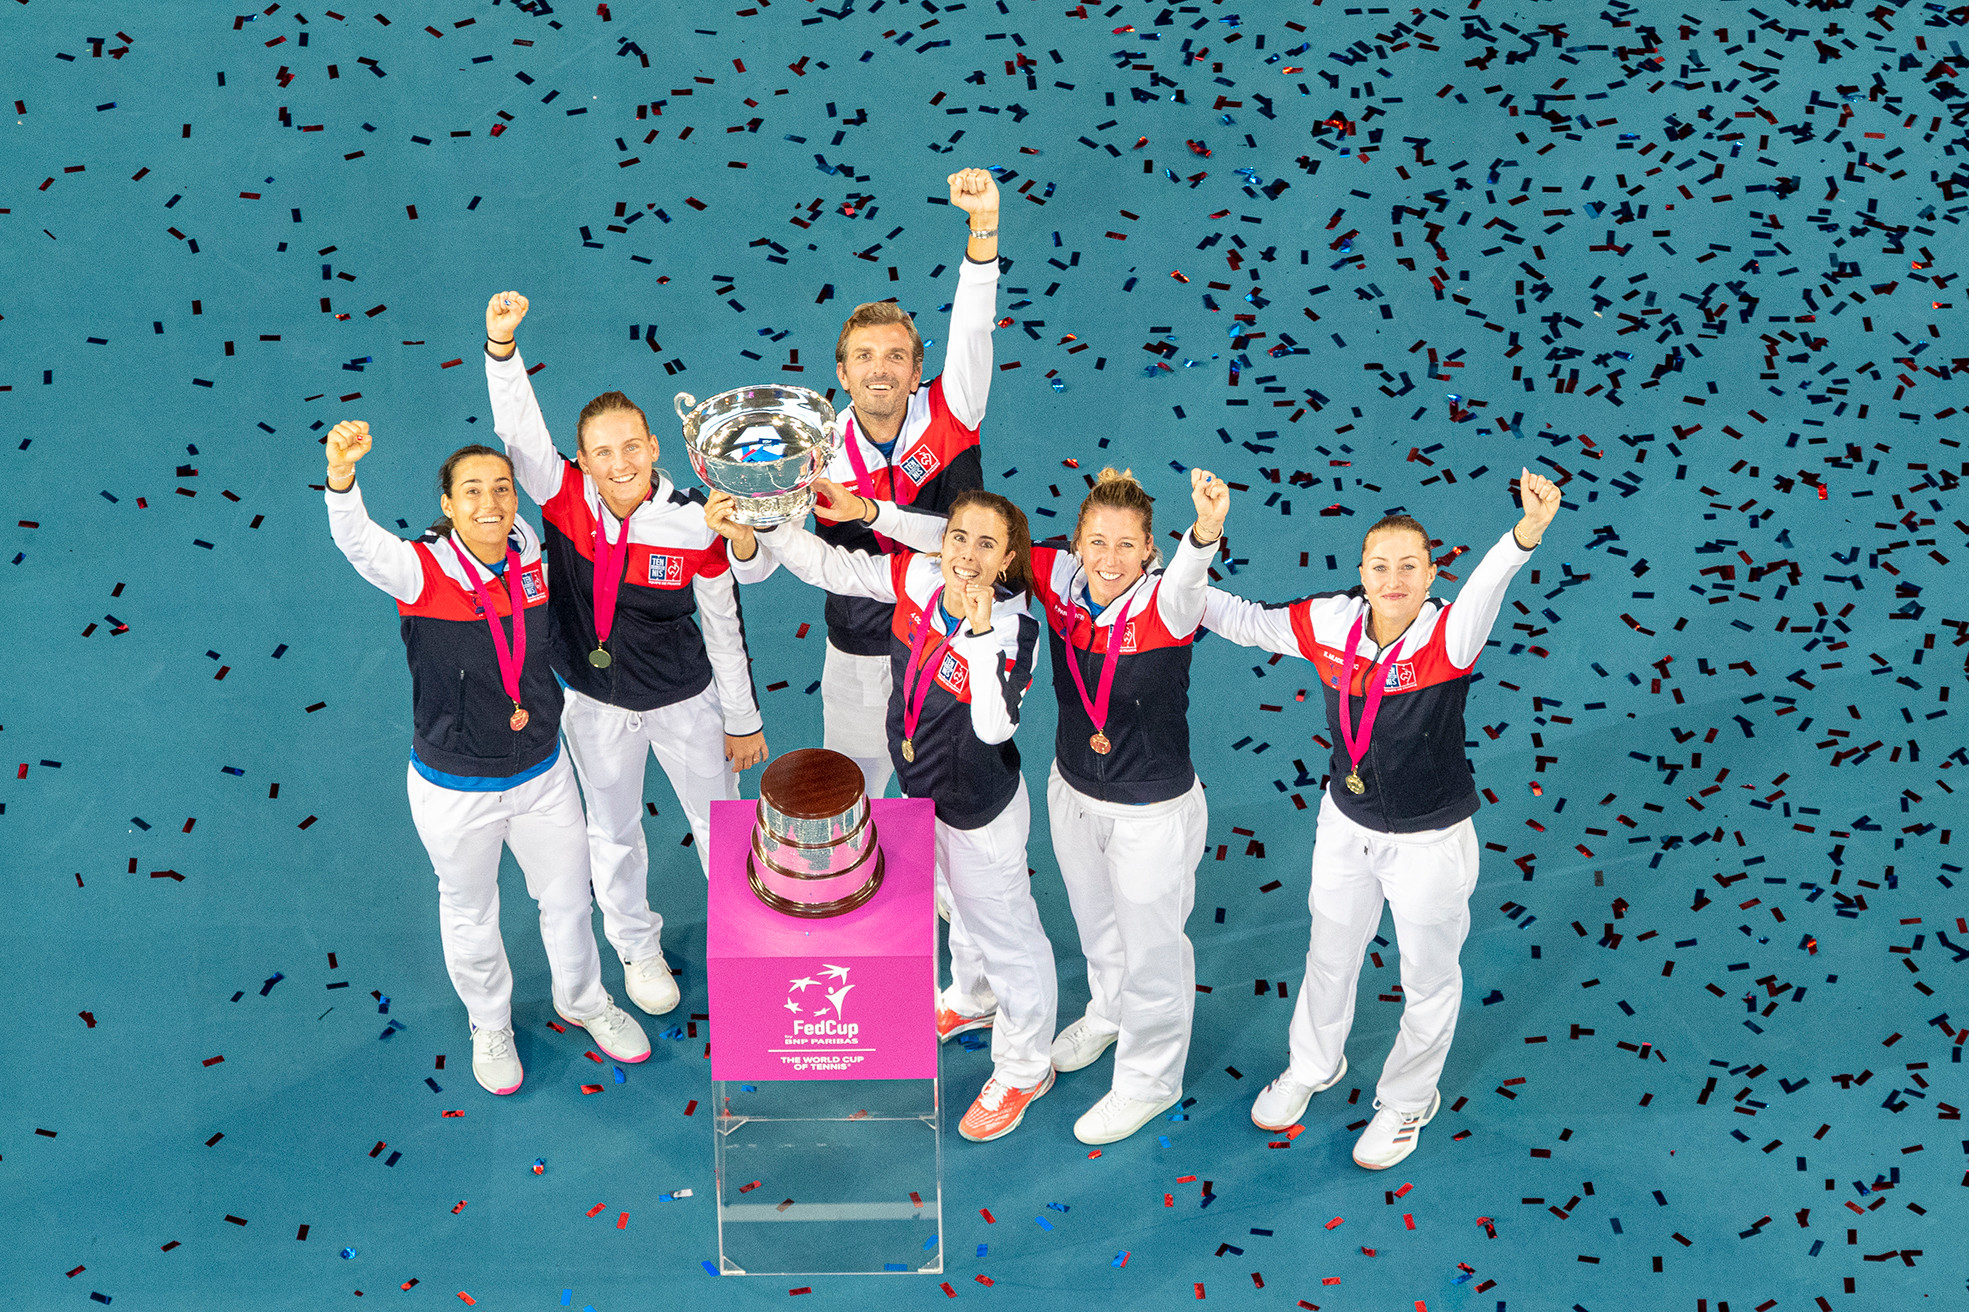 France are the reigning Fed Cup champions